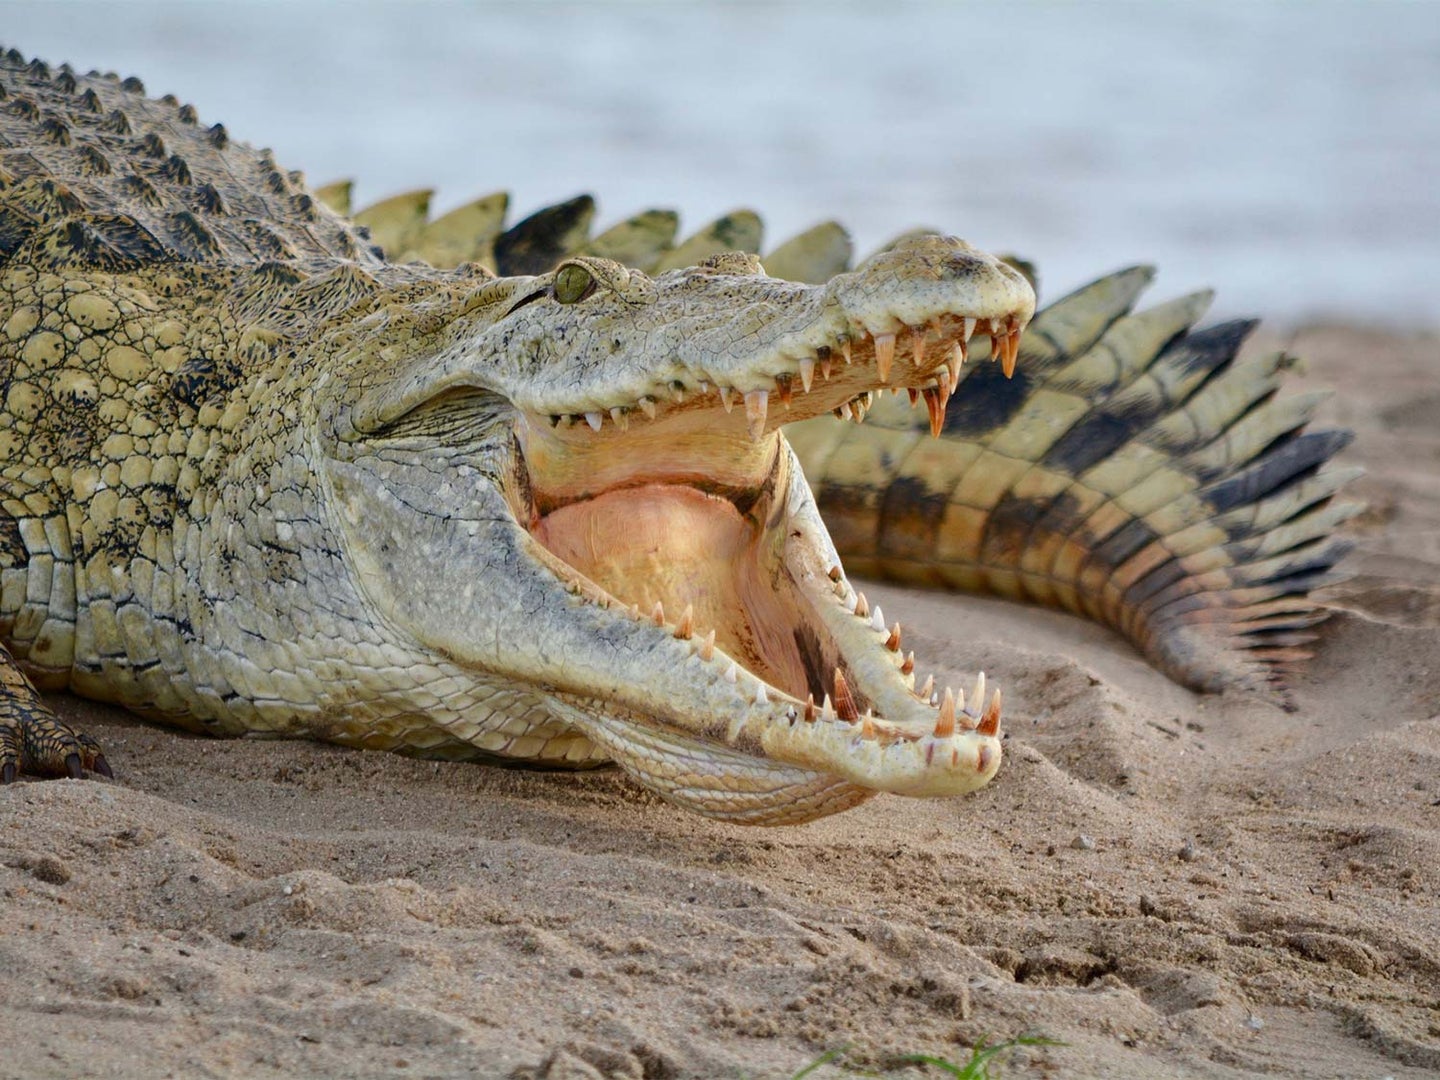 A large crocodile with its mouth open on a sandbar.